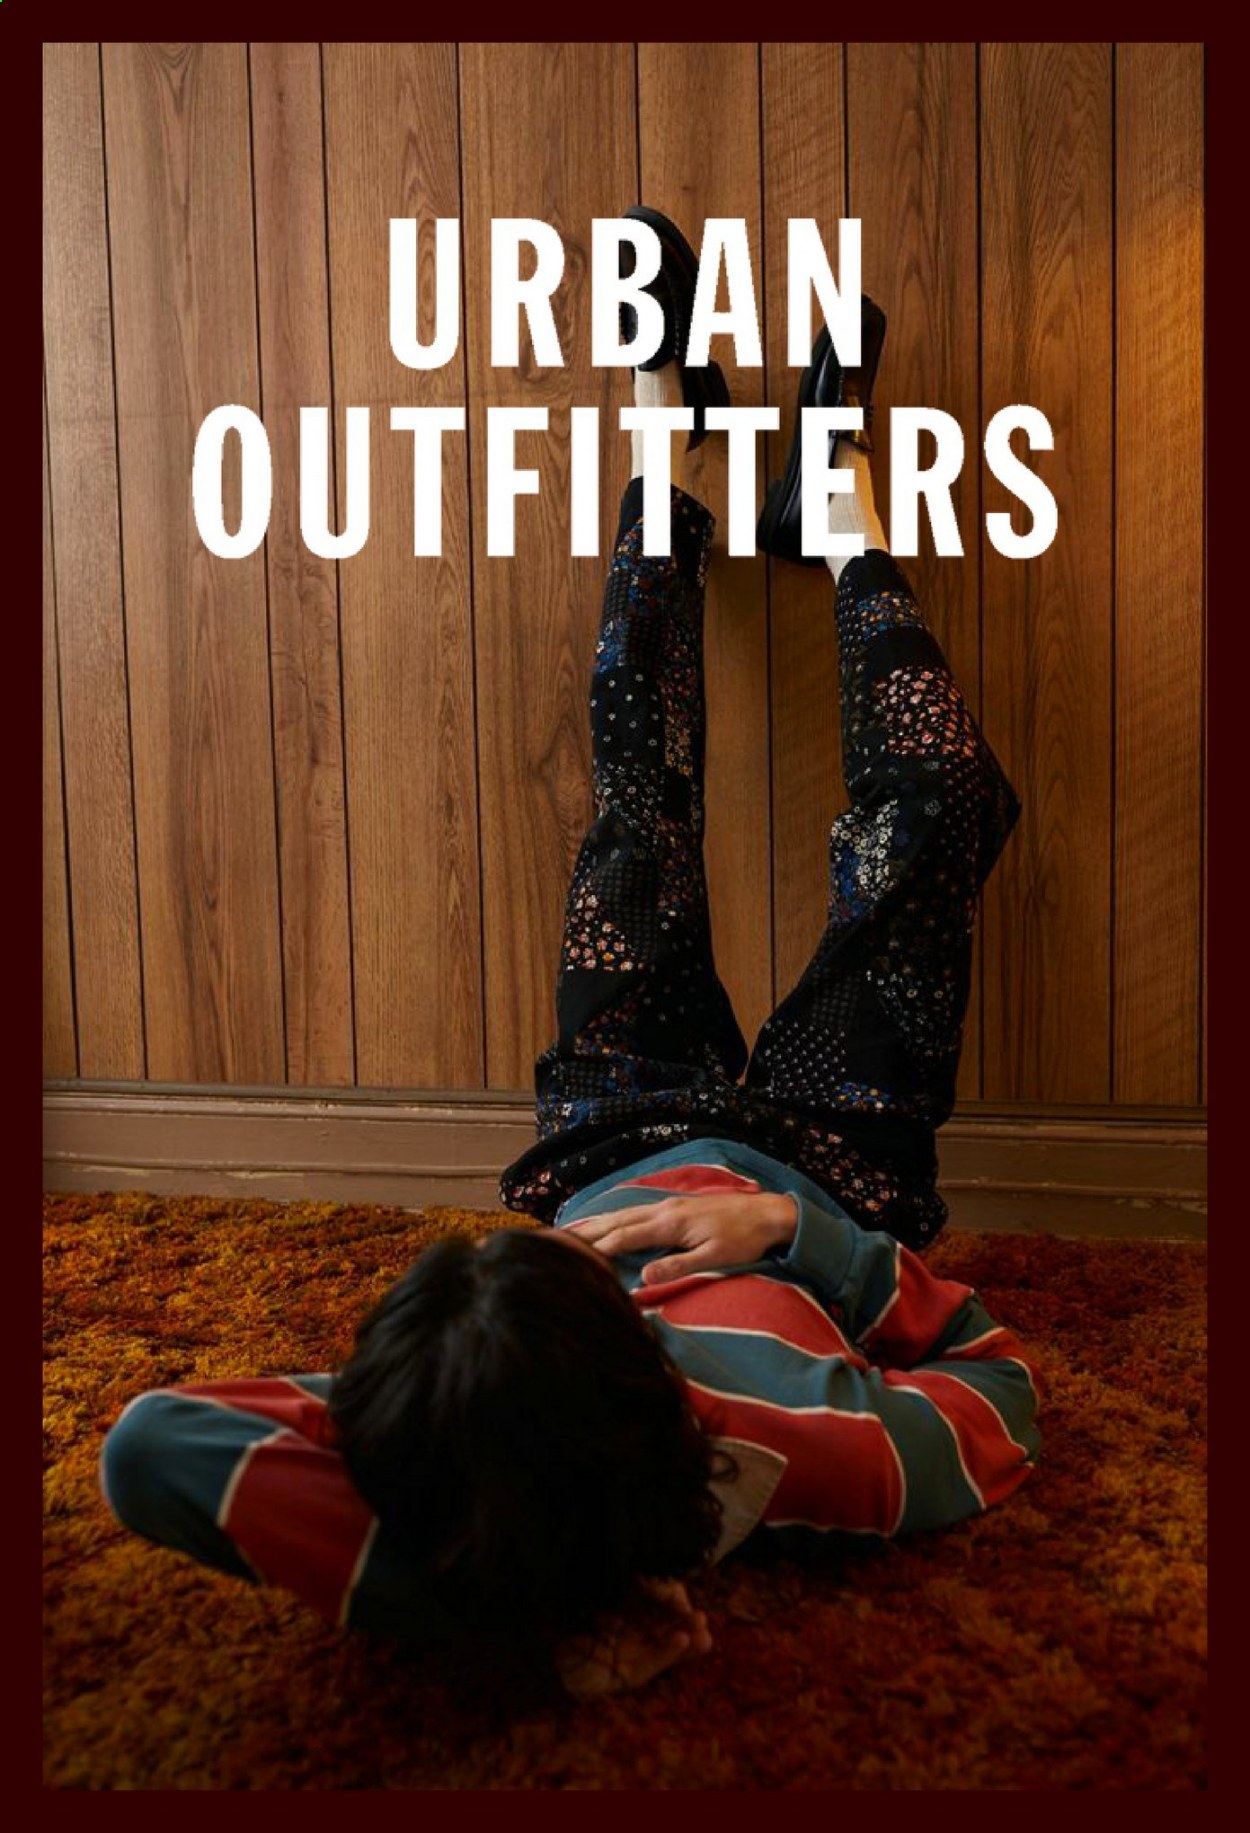 Urban Outfitters flyer .